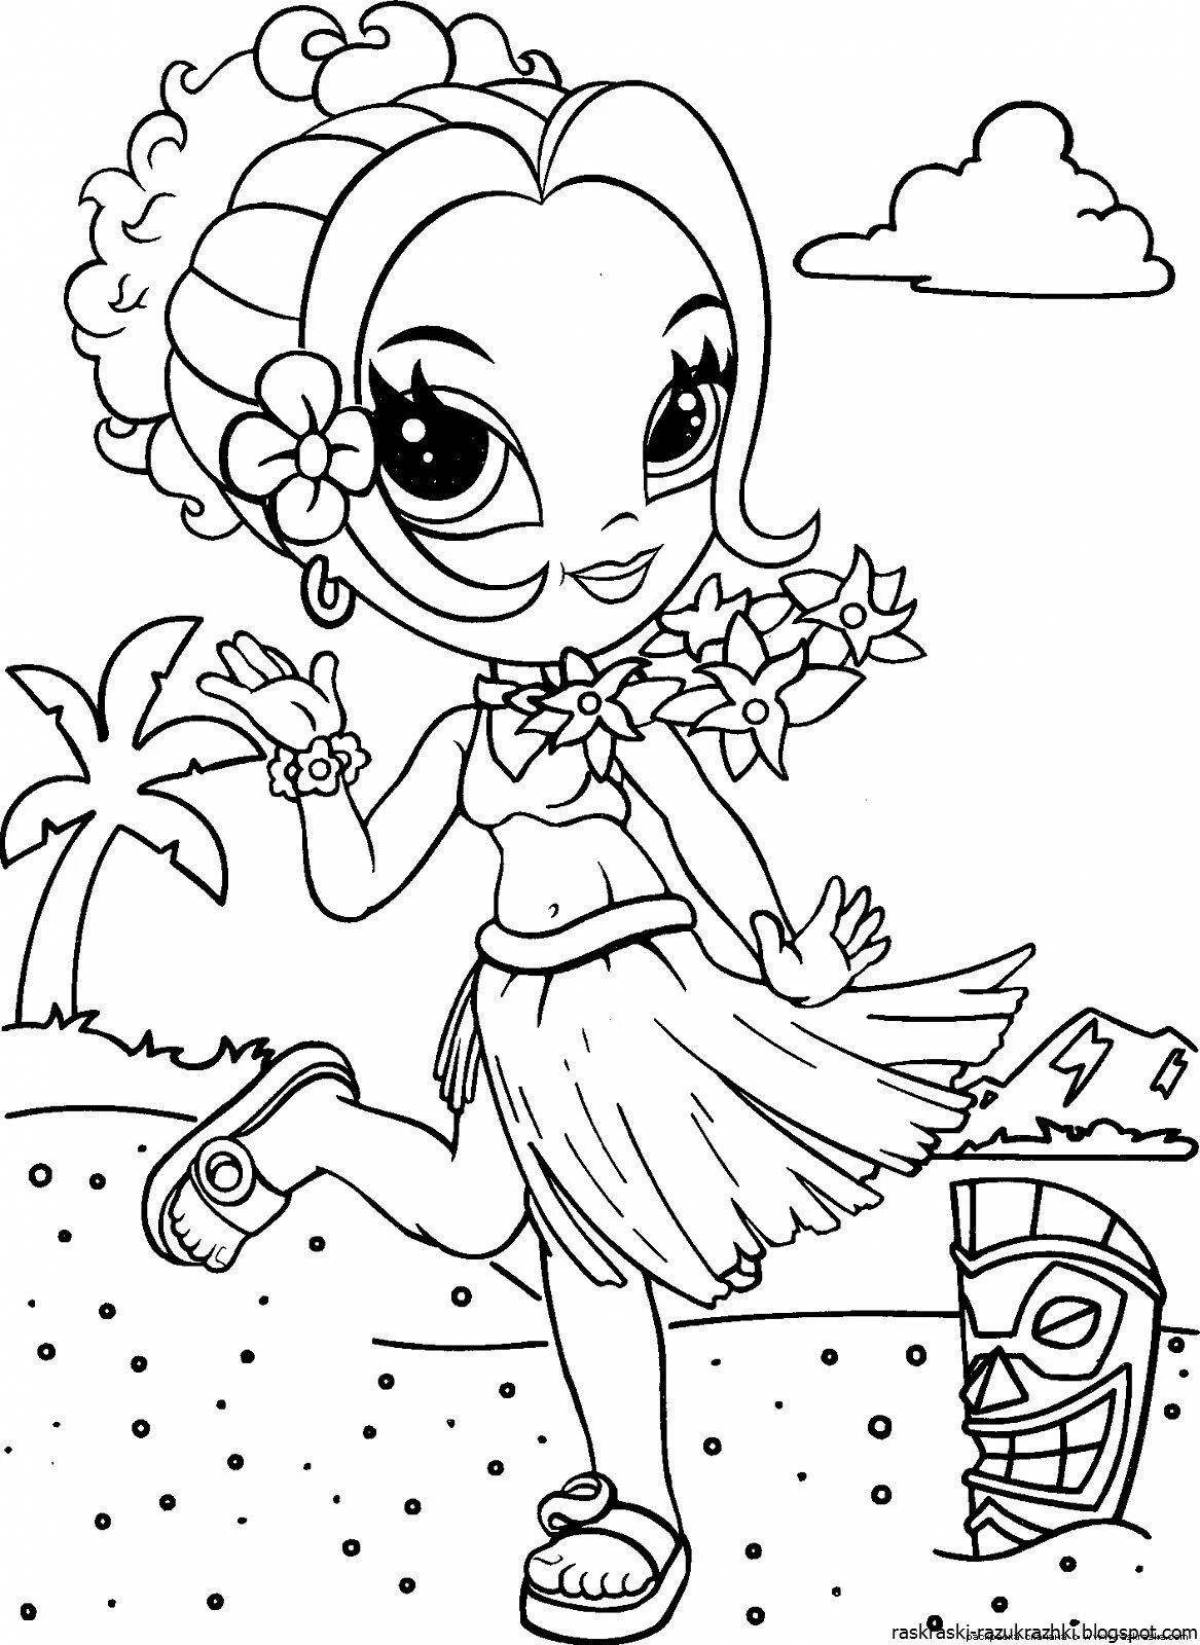 Coloring book for 11 year old girls